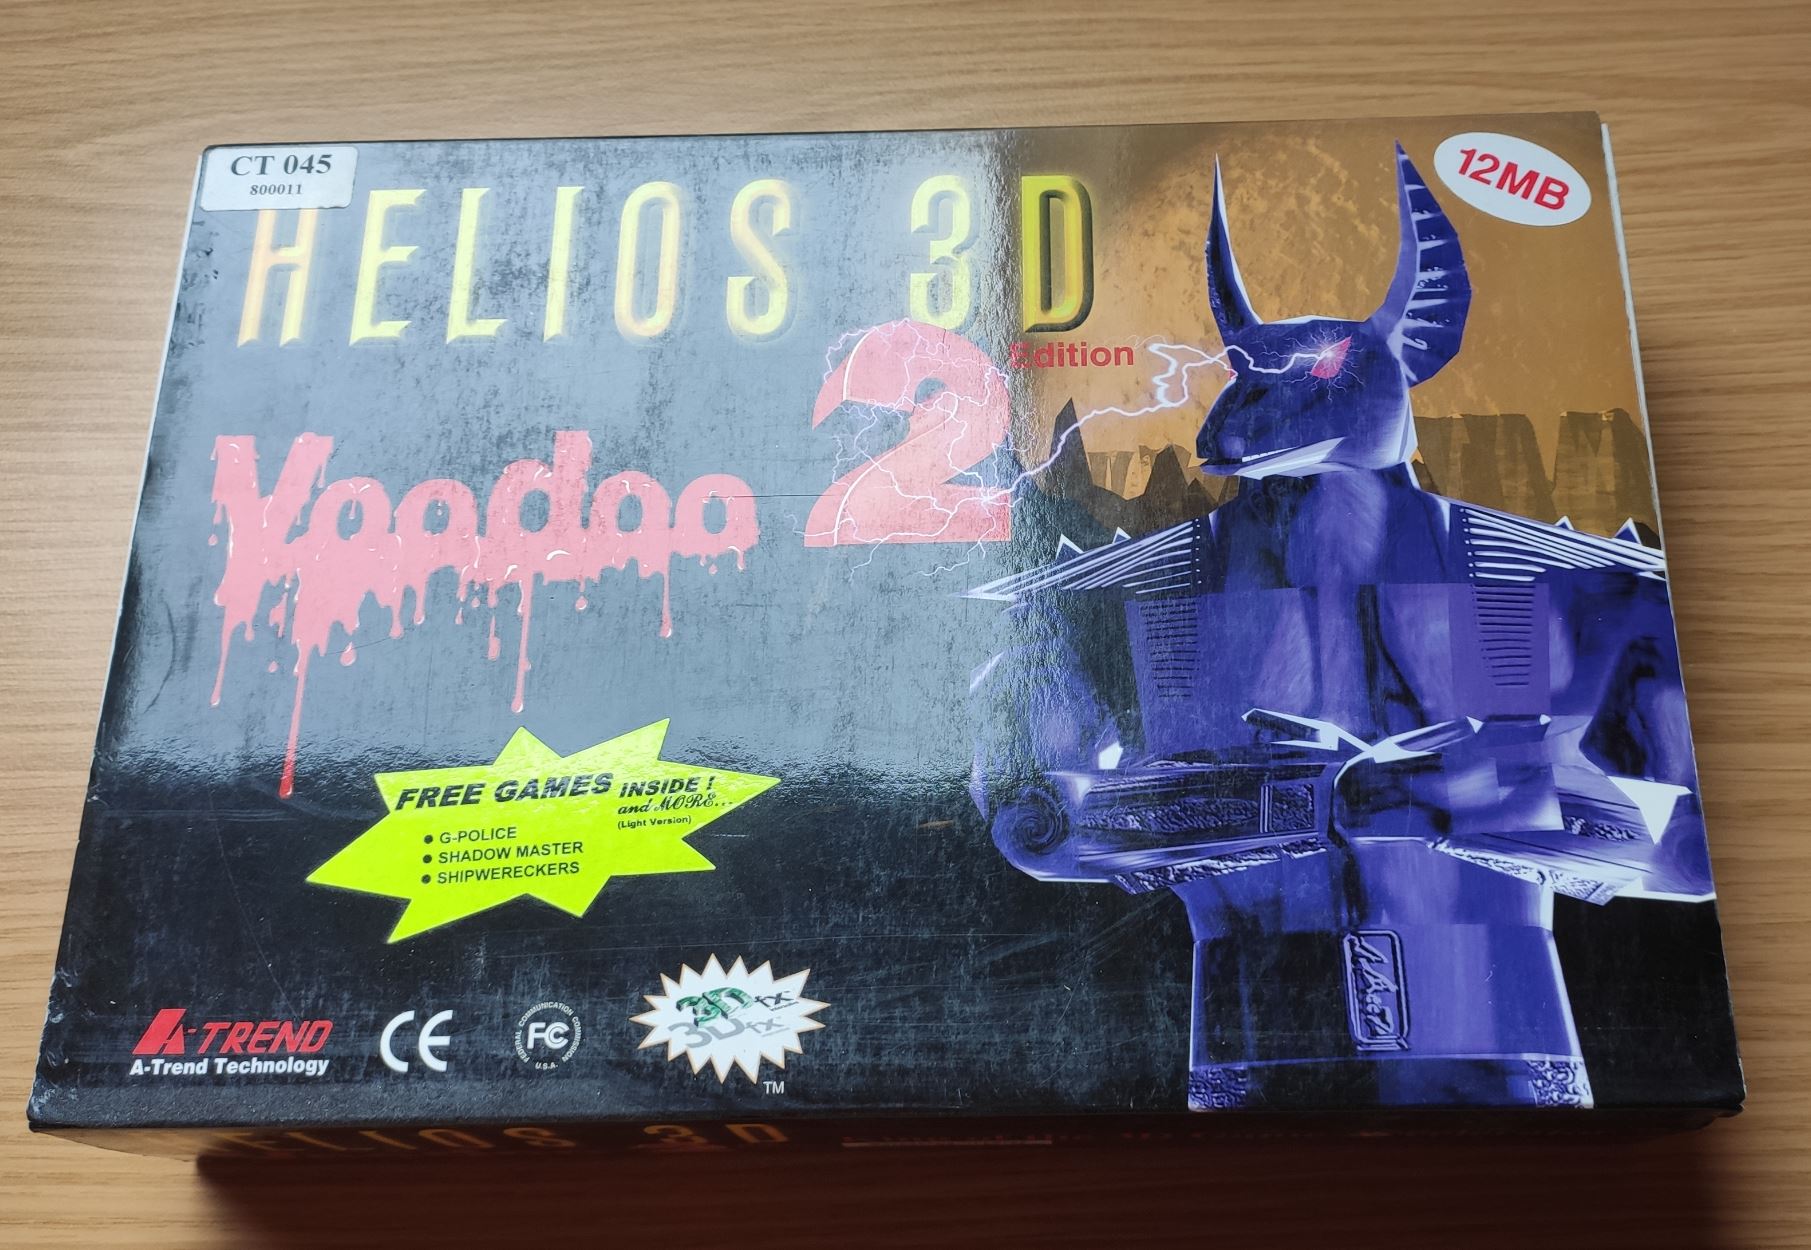 A-Trend Helios 3d Vodoo2 Edition 12 MB OVP.JPG